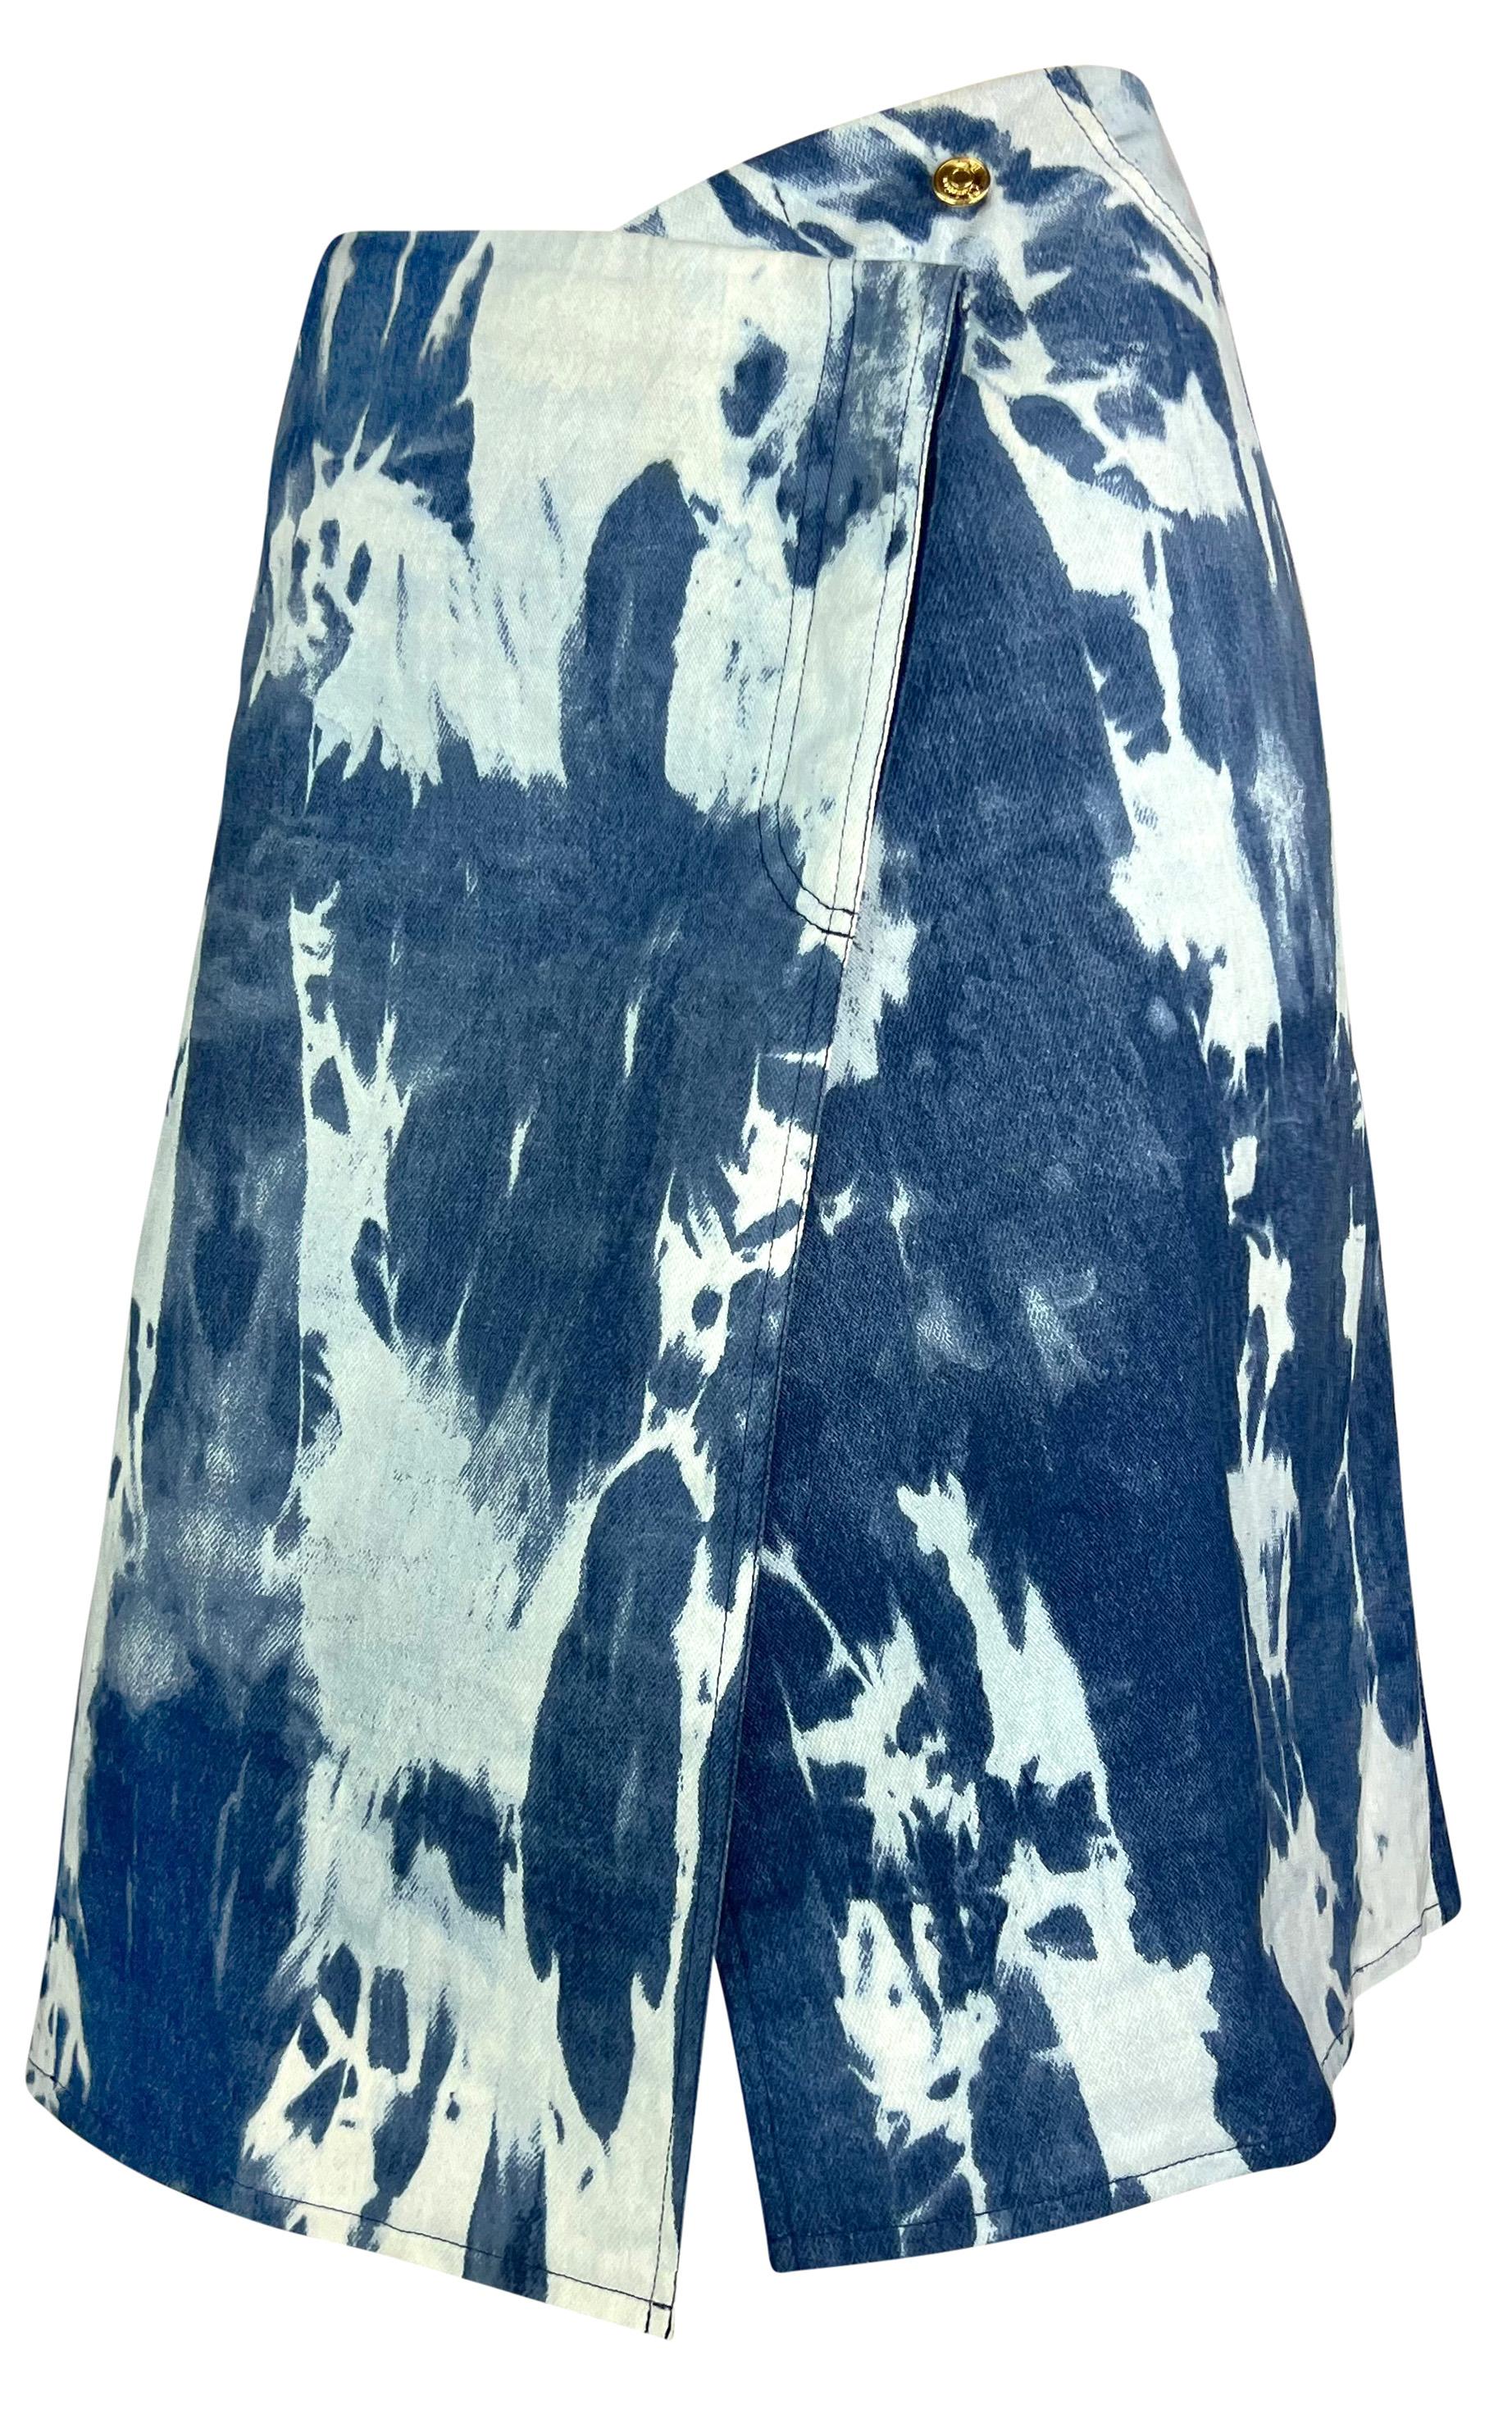 F/W 2000 Christian Dior by John Galliano Tie-Dye Blue Denim Asymmetric Skirt In Excellent Condition For Sale In West Hollywood, CA